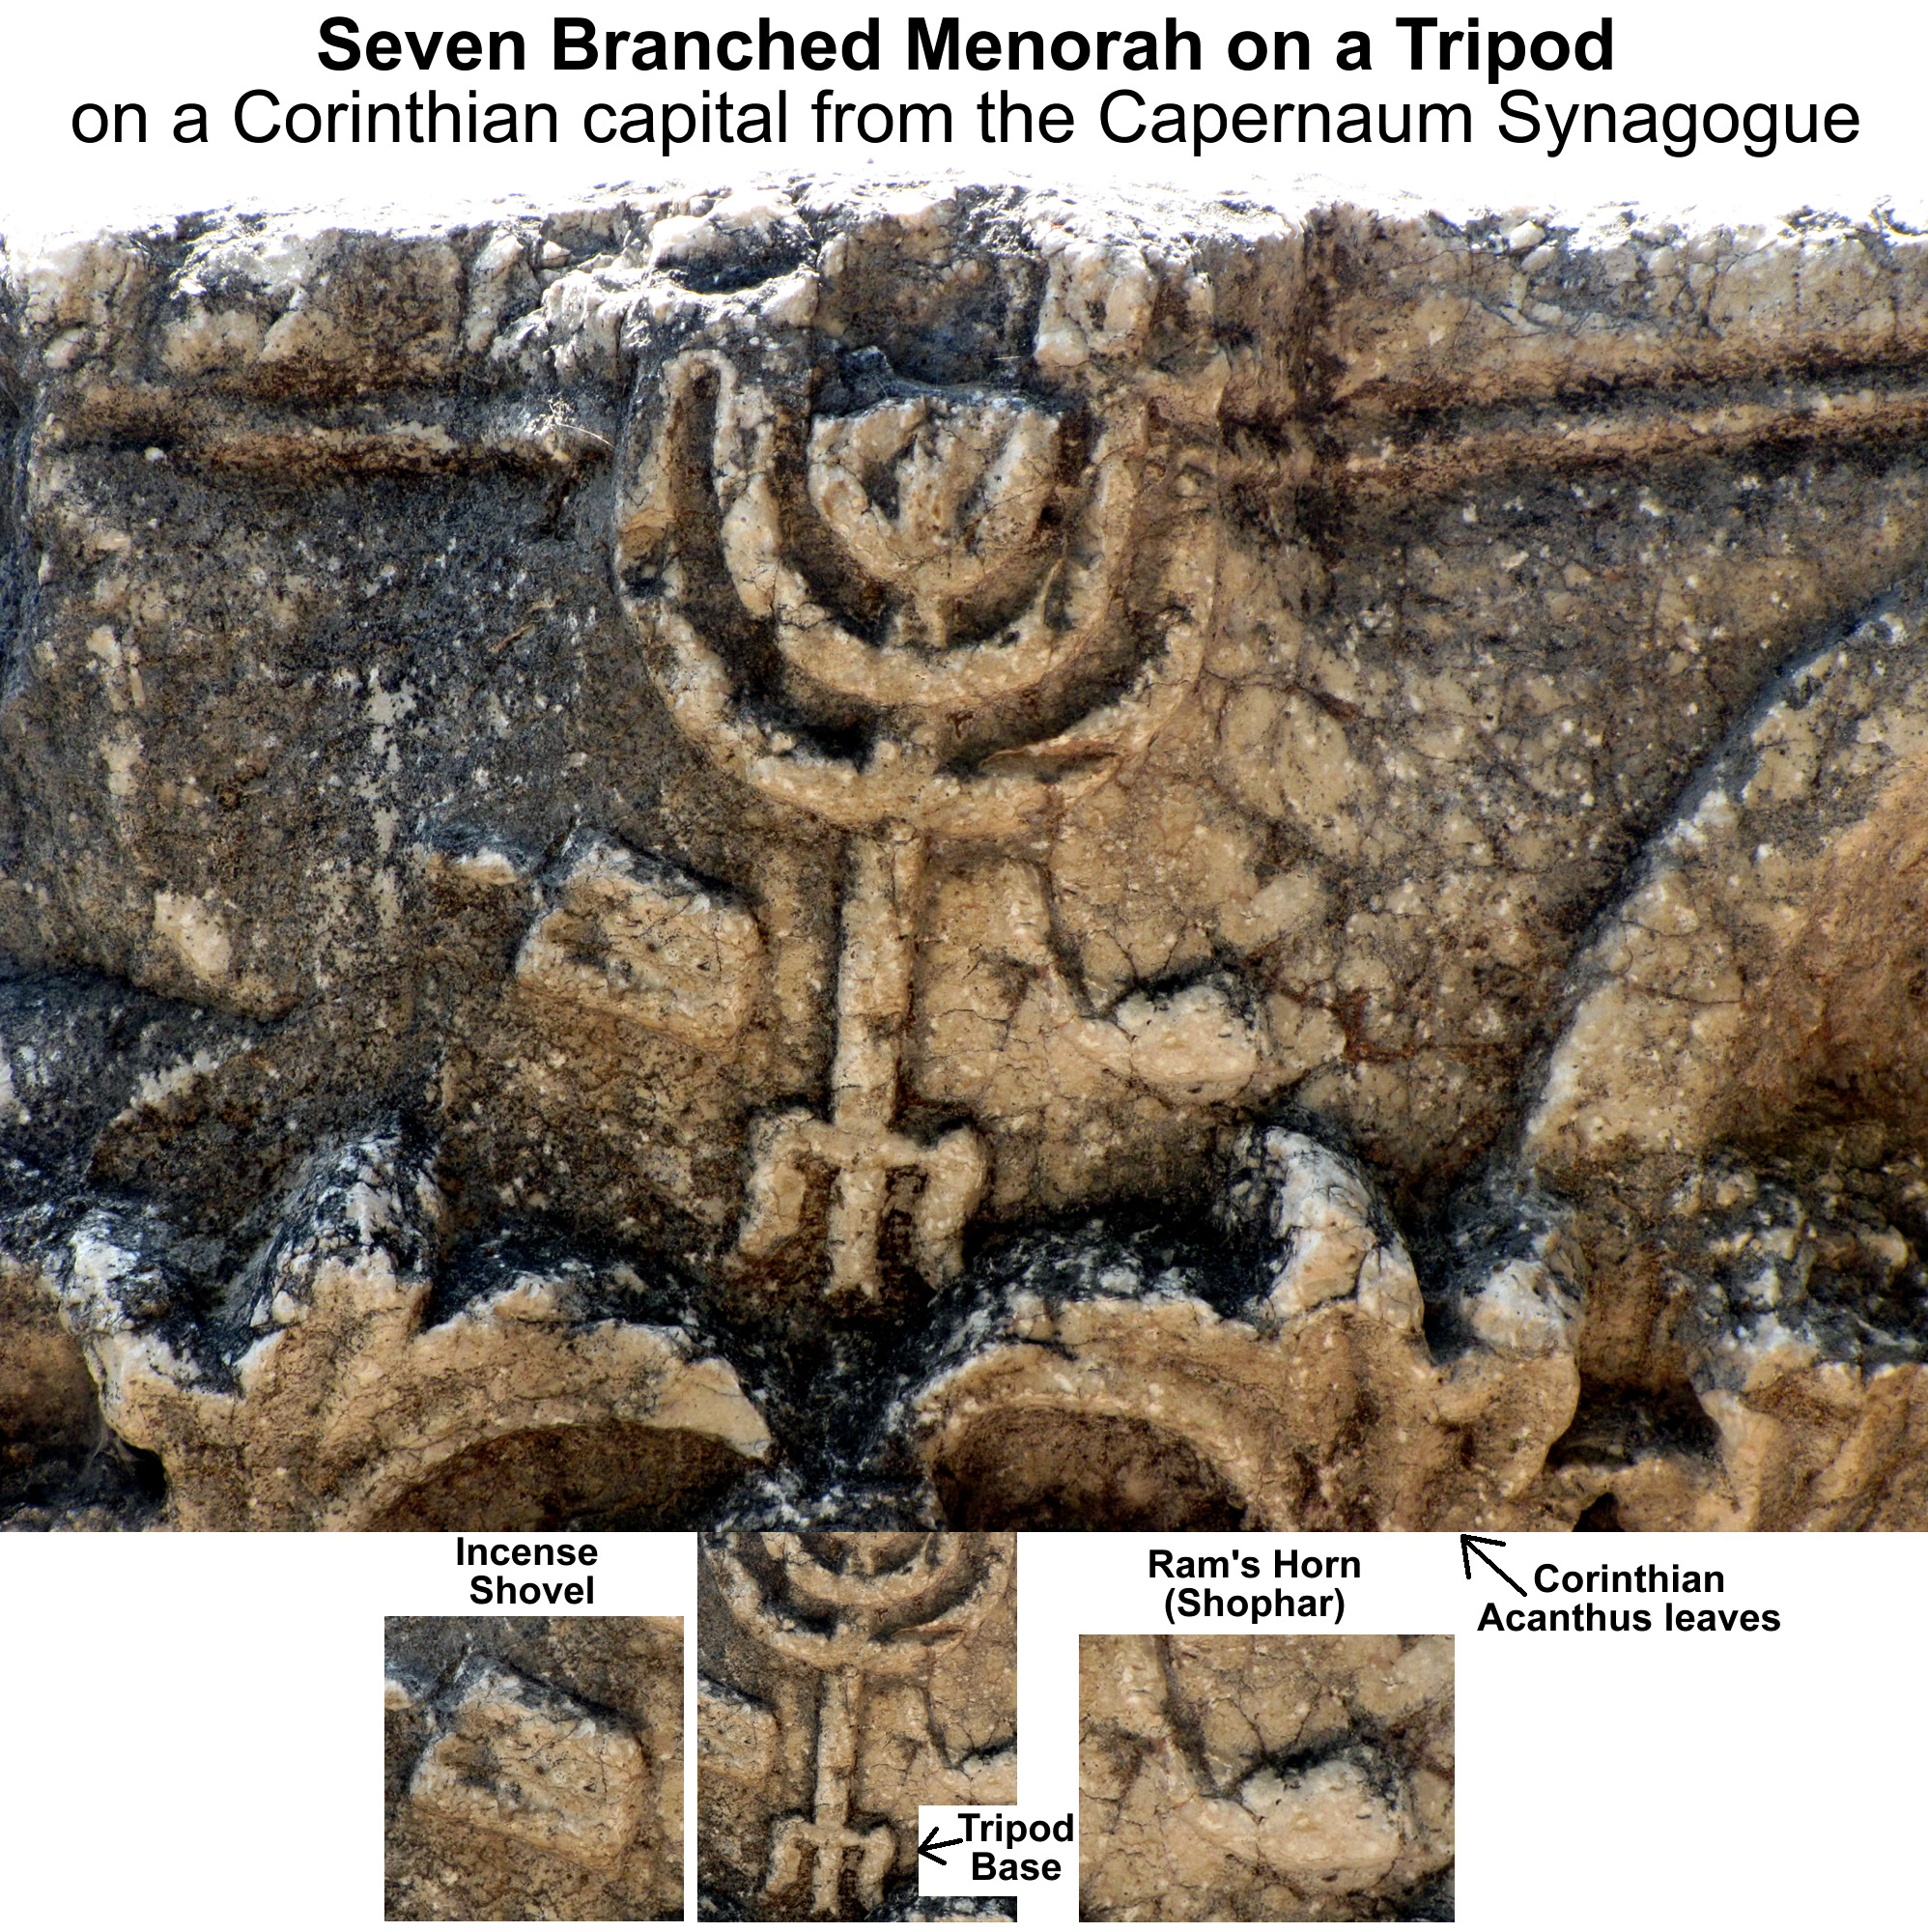 Seven Branched Menorah with tripod and incense shovel and ram's horn shophar